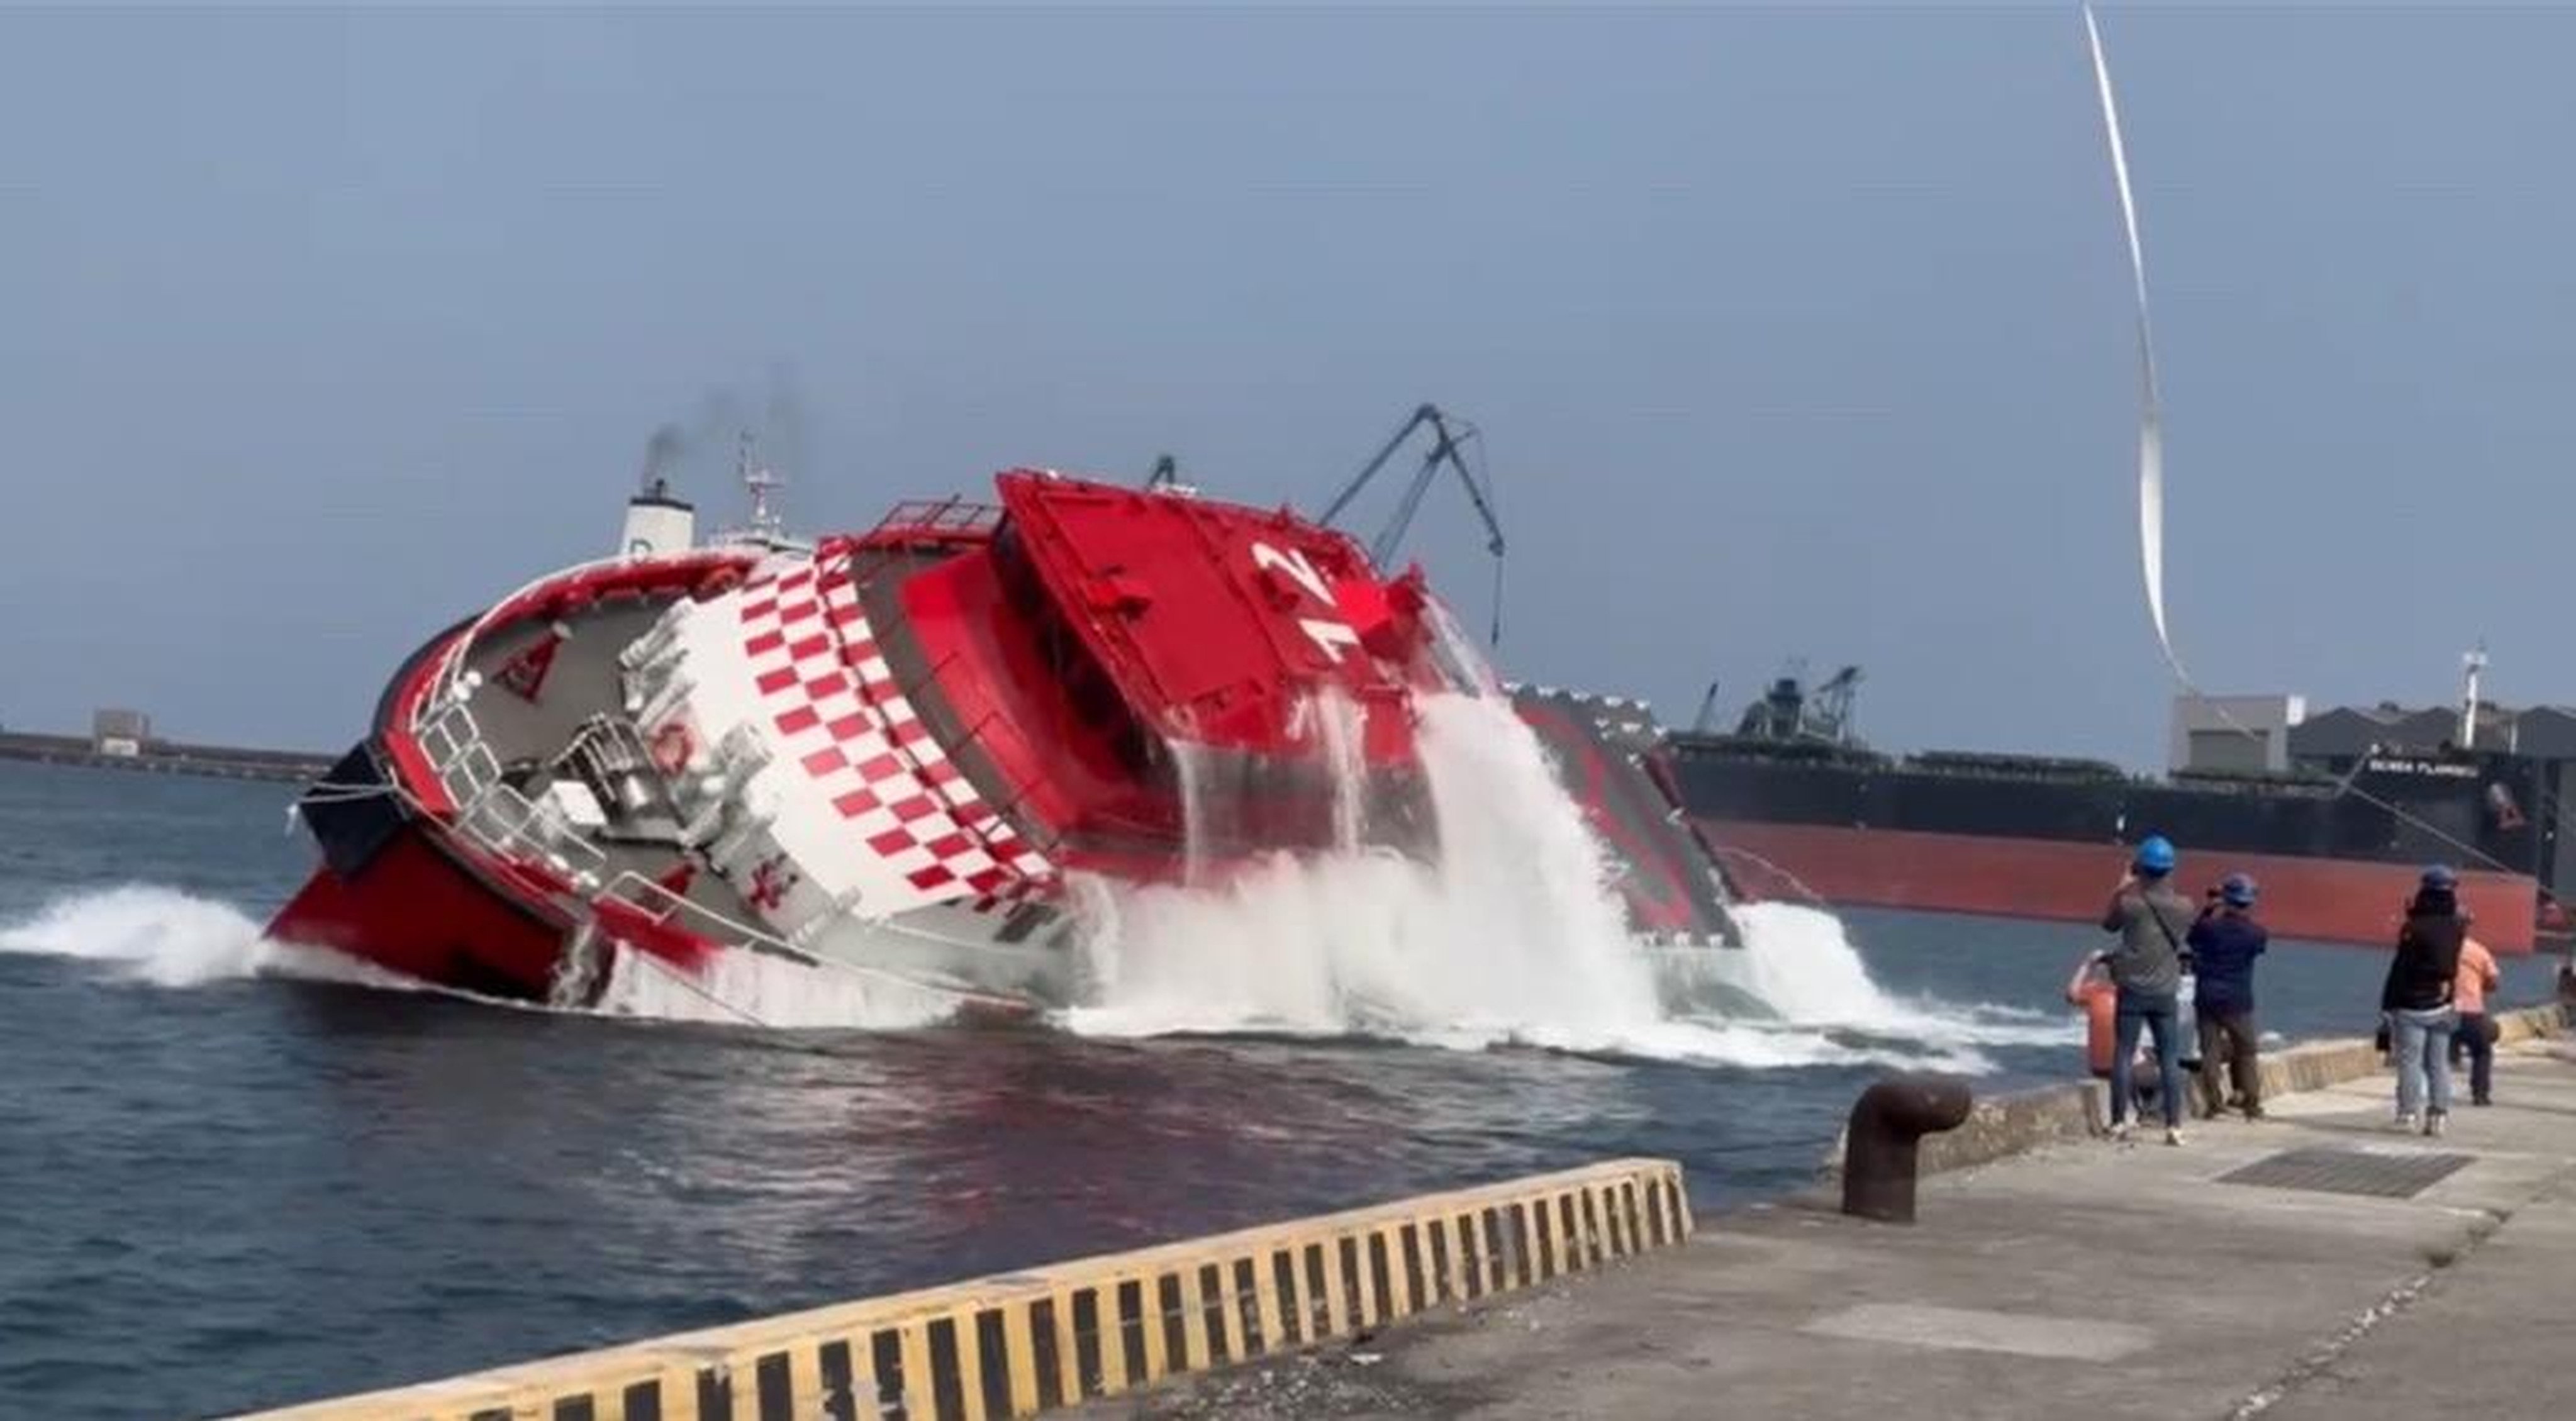 The self-righting boat will allow firefighters to carry out rescue operations in foul weather. Photo: Lungteh Shipbuilding